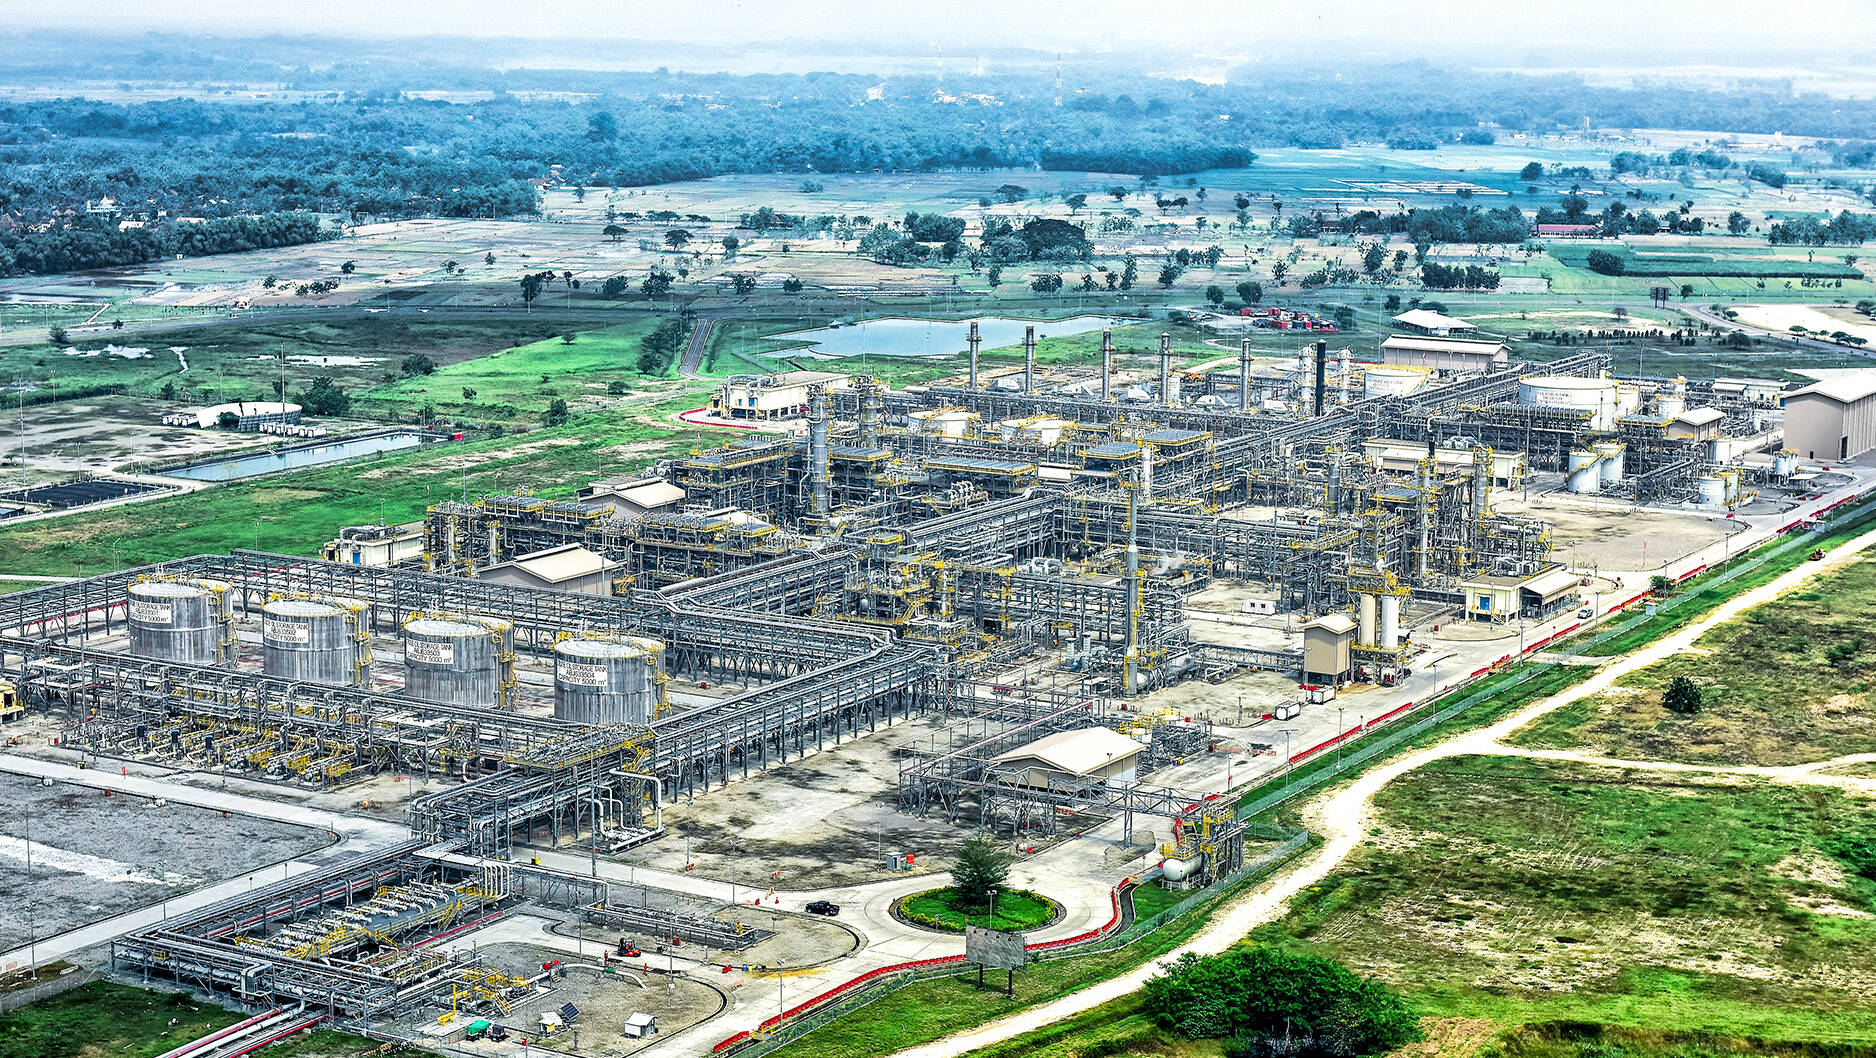 Image Photo — The Central Processing Facility of Banyu Urip field located in Bojonegoro, East Java.